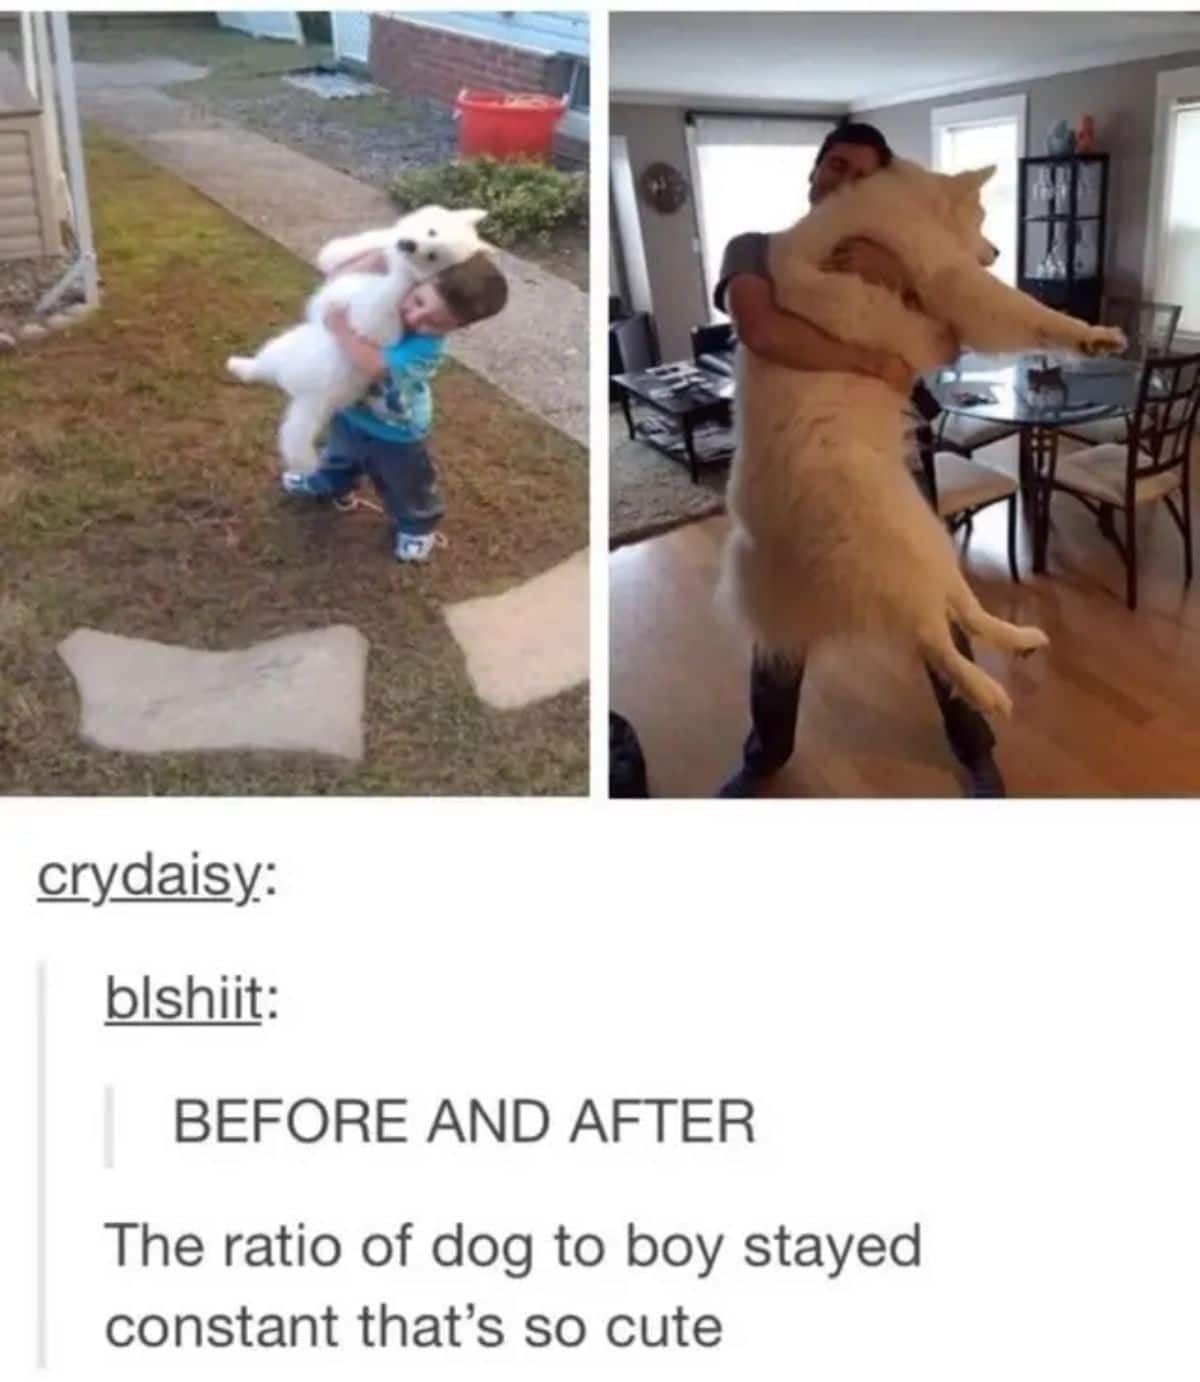 1 photo of fluffy white puppy being held by a boy and 1 photo of a man holding the same fluffy dog